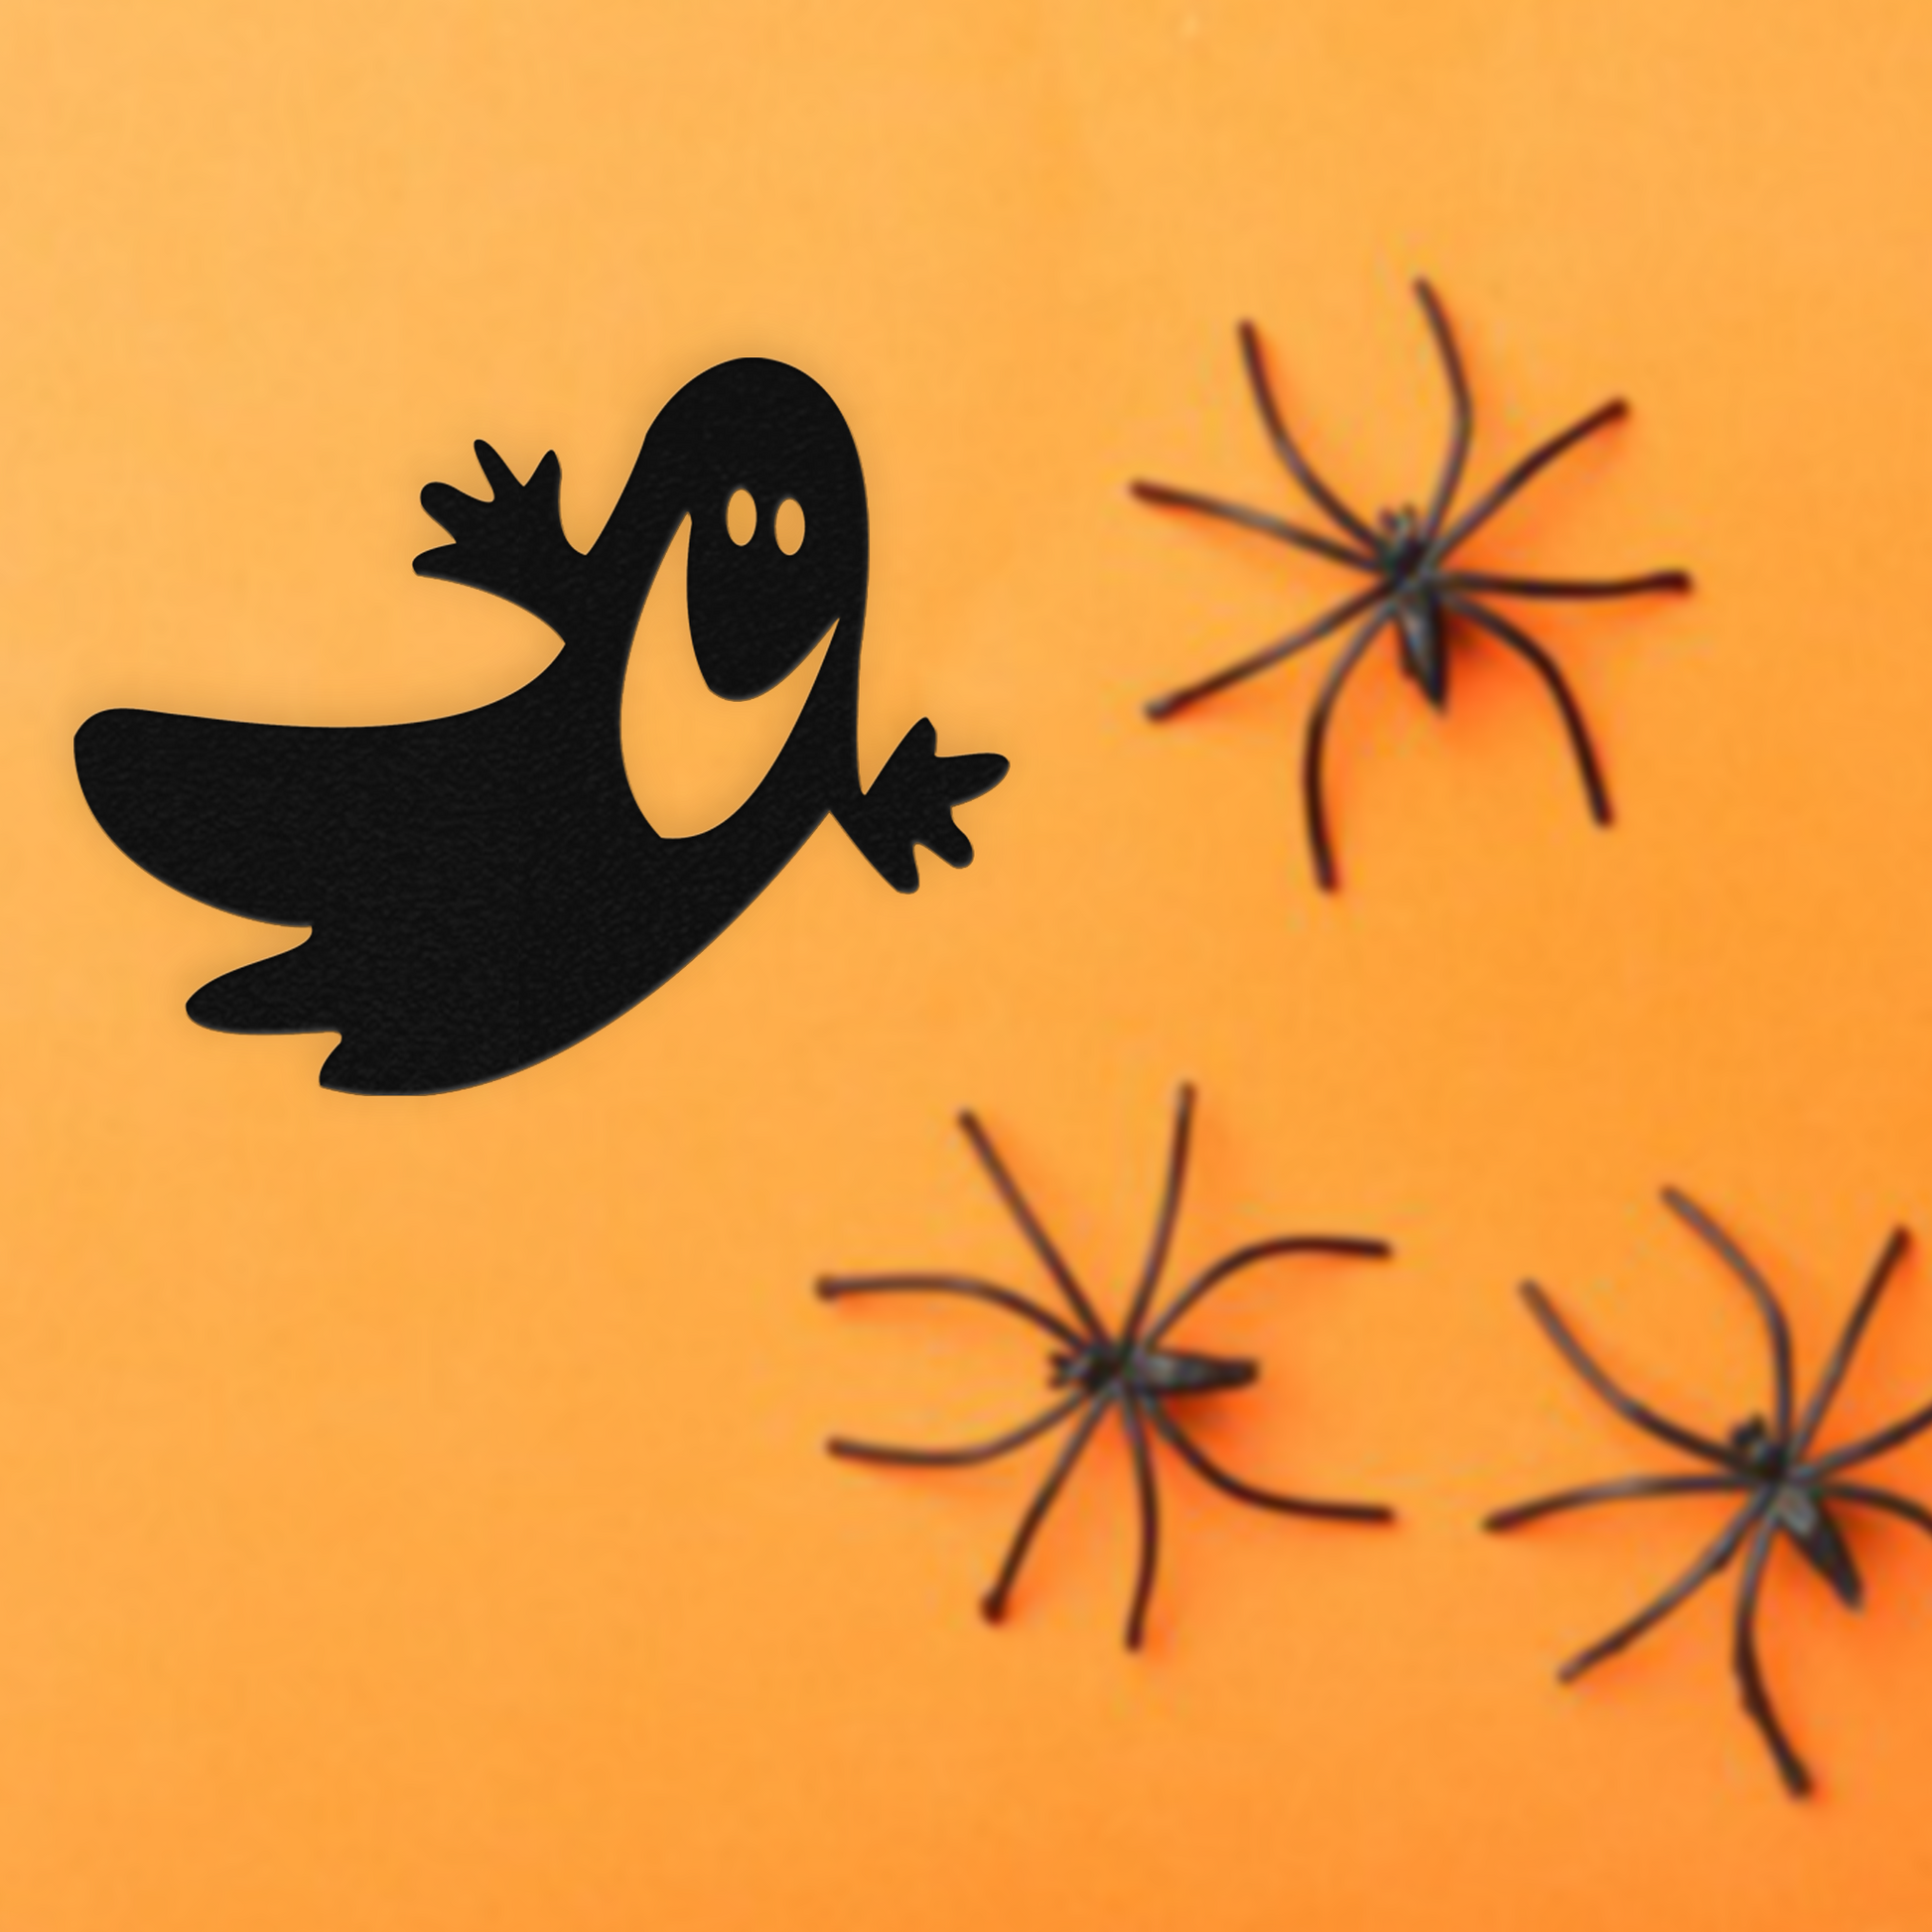 Flying Ghost - Metal Wall Art - Orange Background And Spiders - Badger Steel Usa